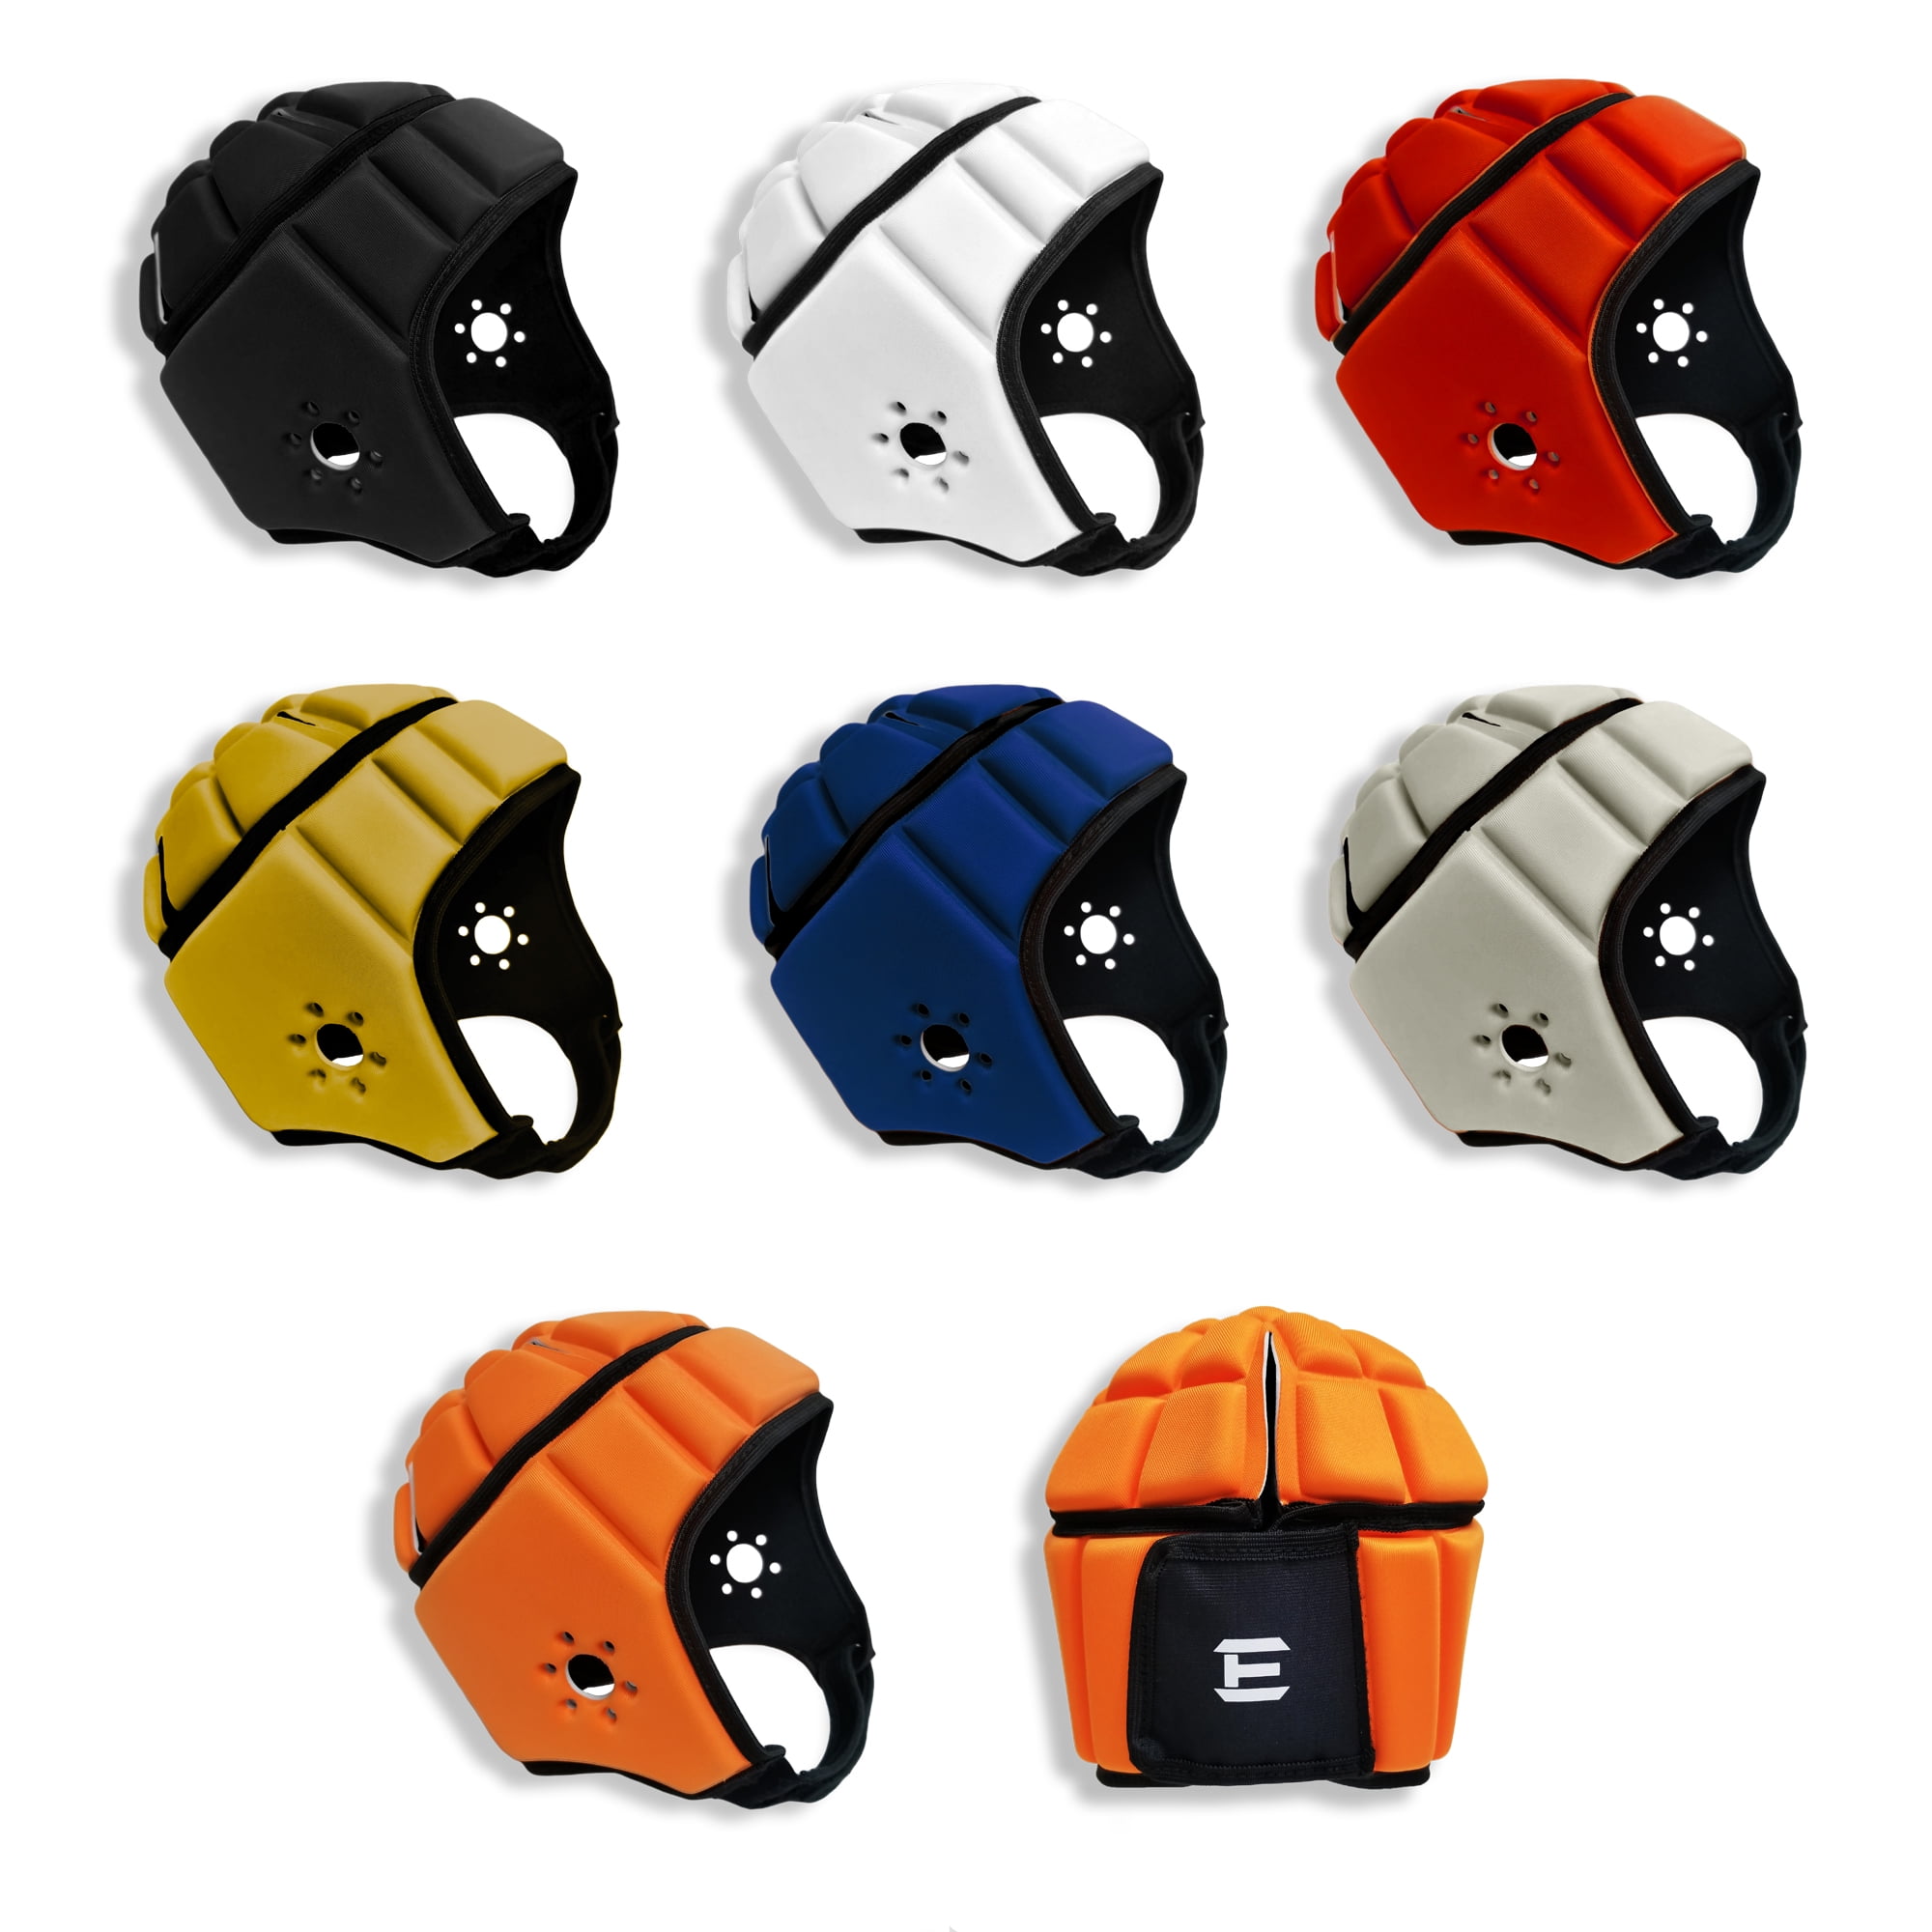 Soccer Epilepsy Head Fall Protection for Youth & Adult Goalkeeper Lacrosse Lixada Rugby Helmet Headguard,Adjustable Soft Padded Headgear Protection for Flag Football Rugby 